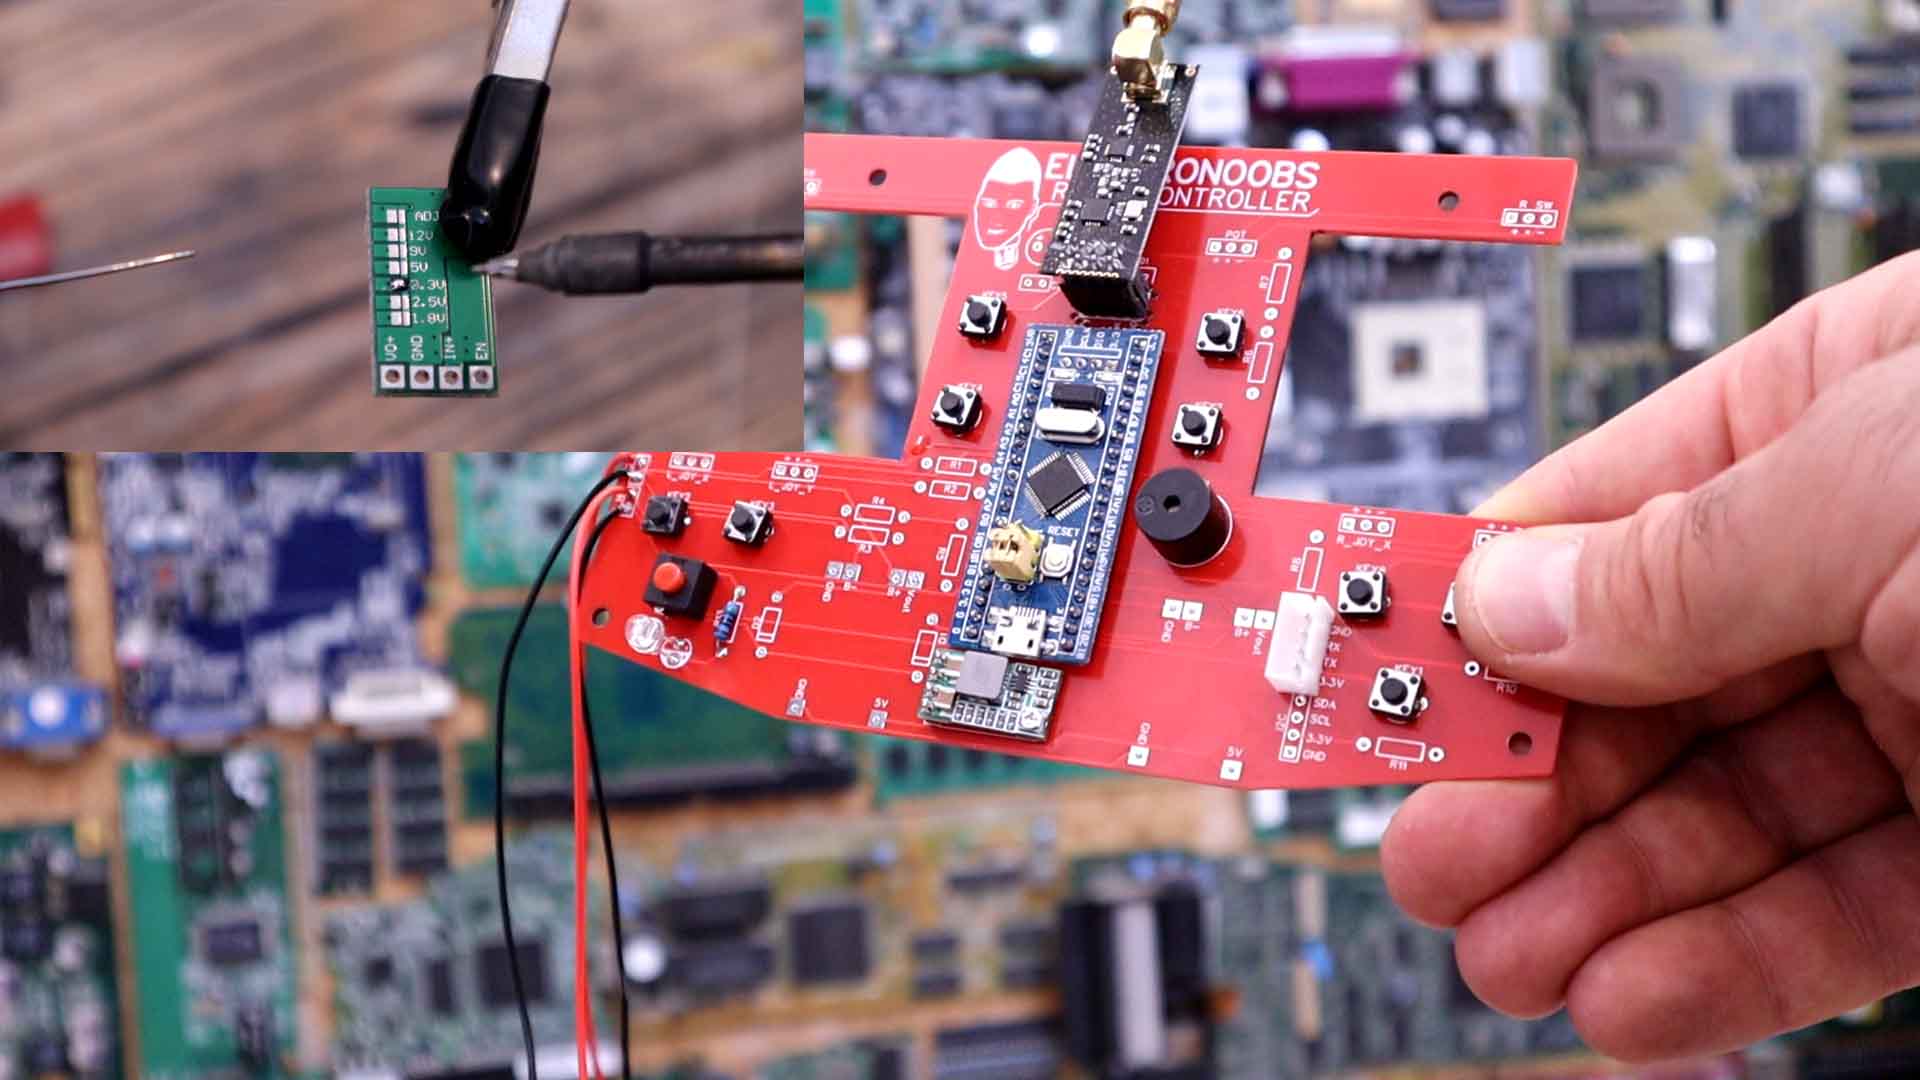 homemade STM radio controller with touchscreen